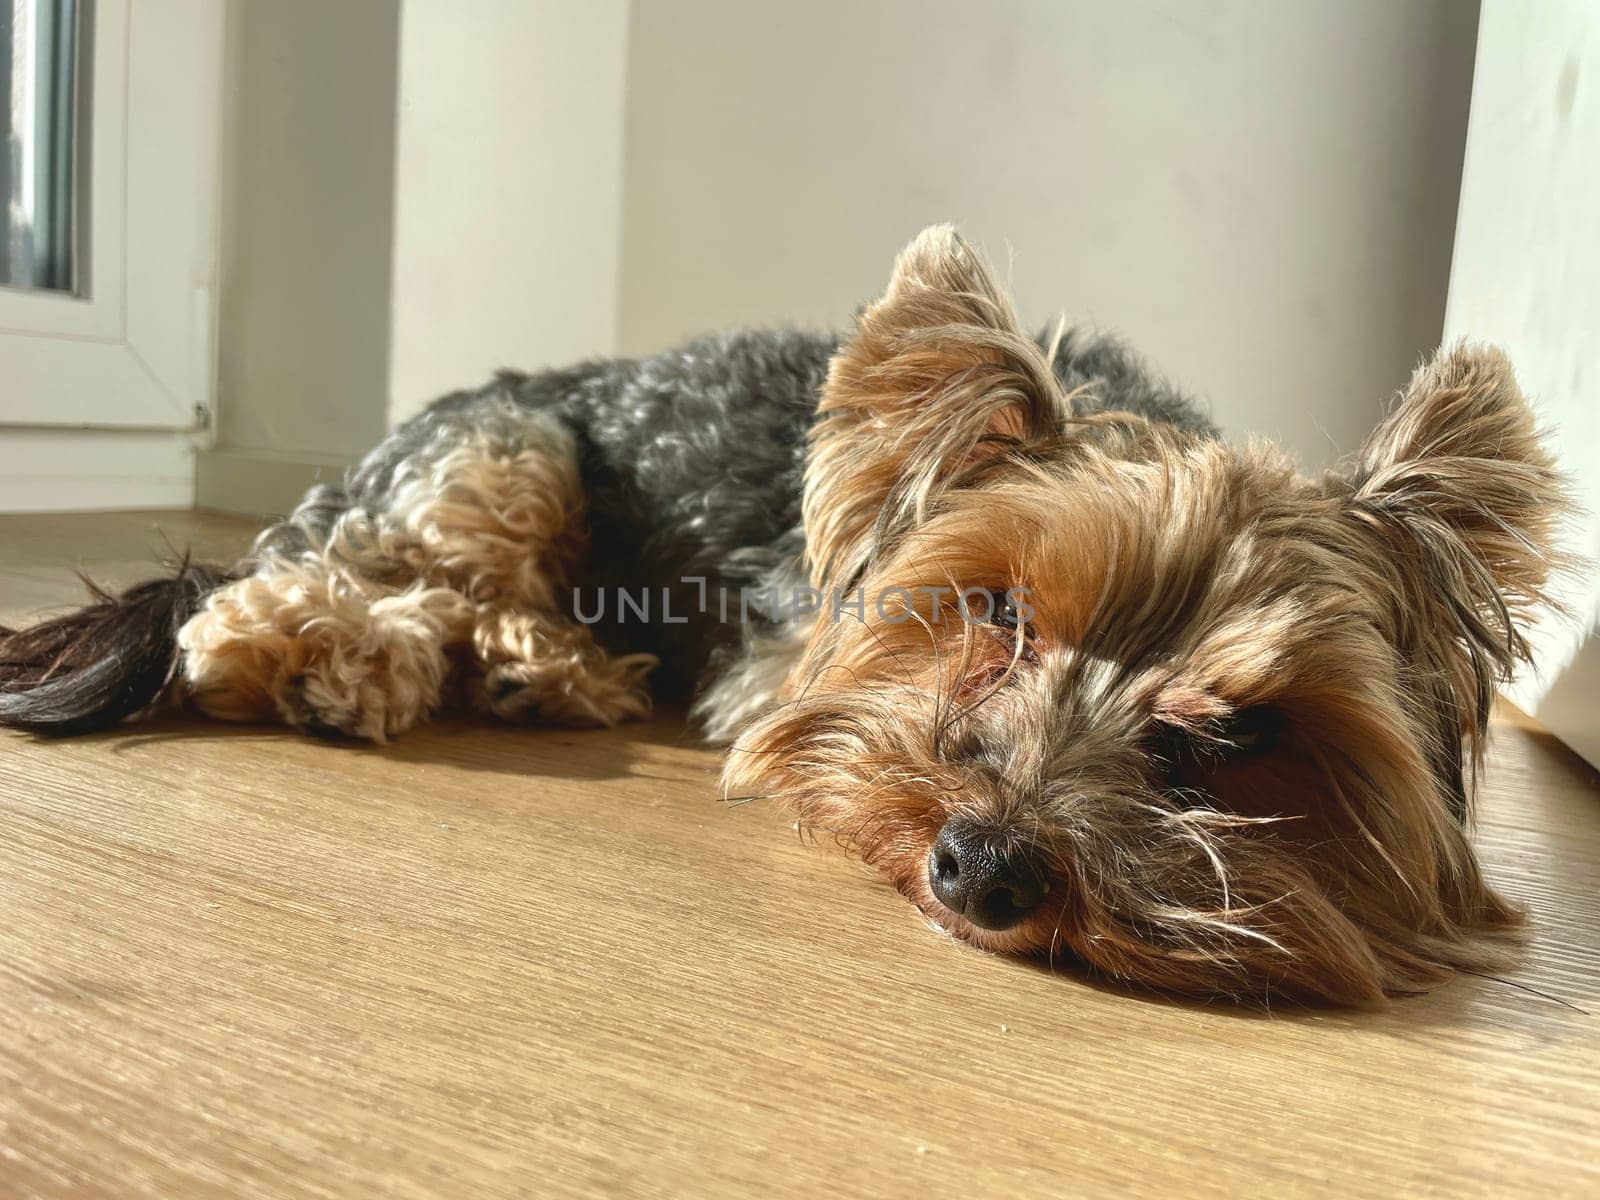 A small Yorkie dog lying on the floor, basking in the spring sun. High quality photo